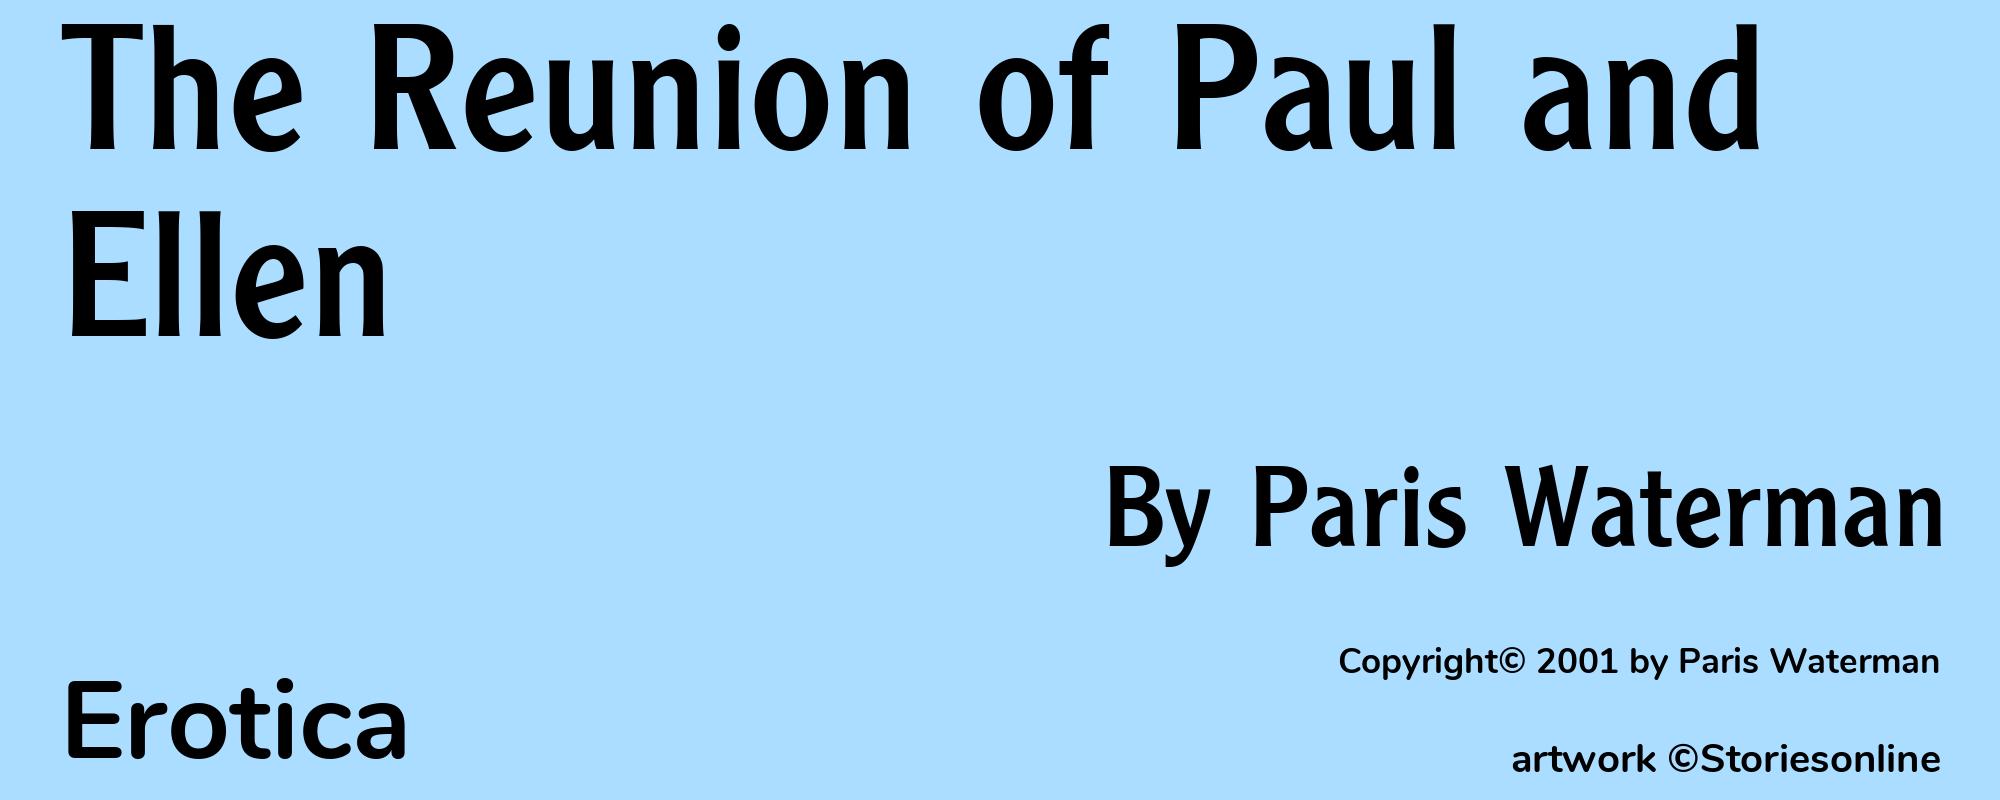 The Reunion of Paul and Ellen - Cover